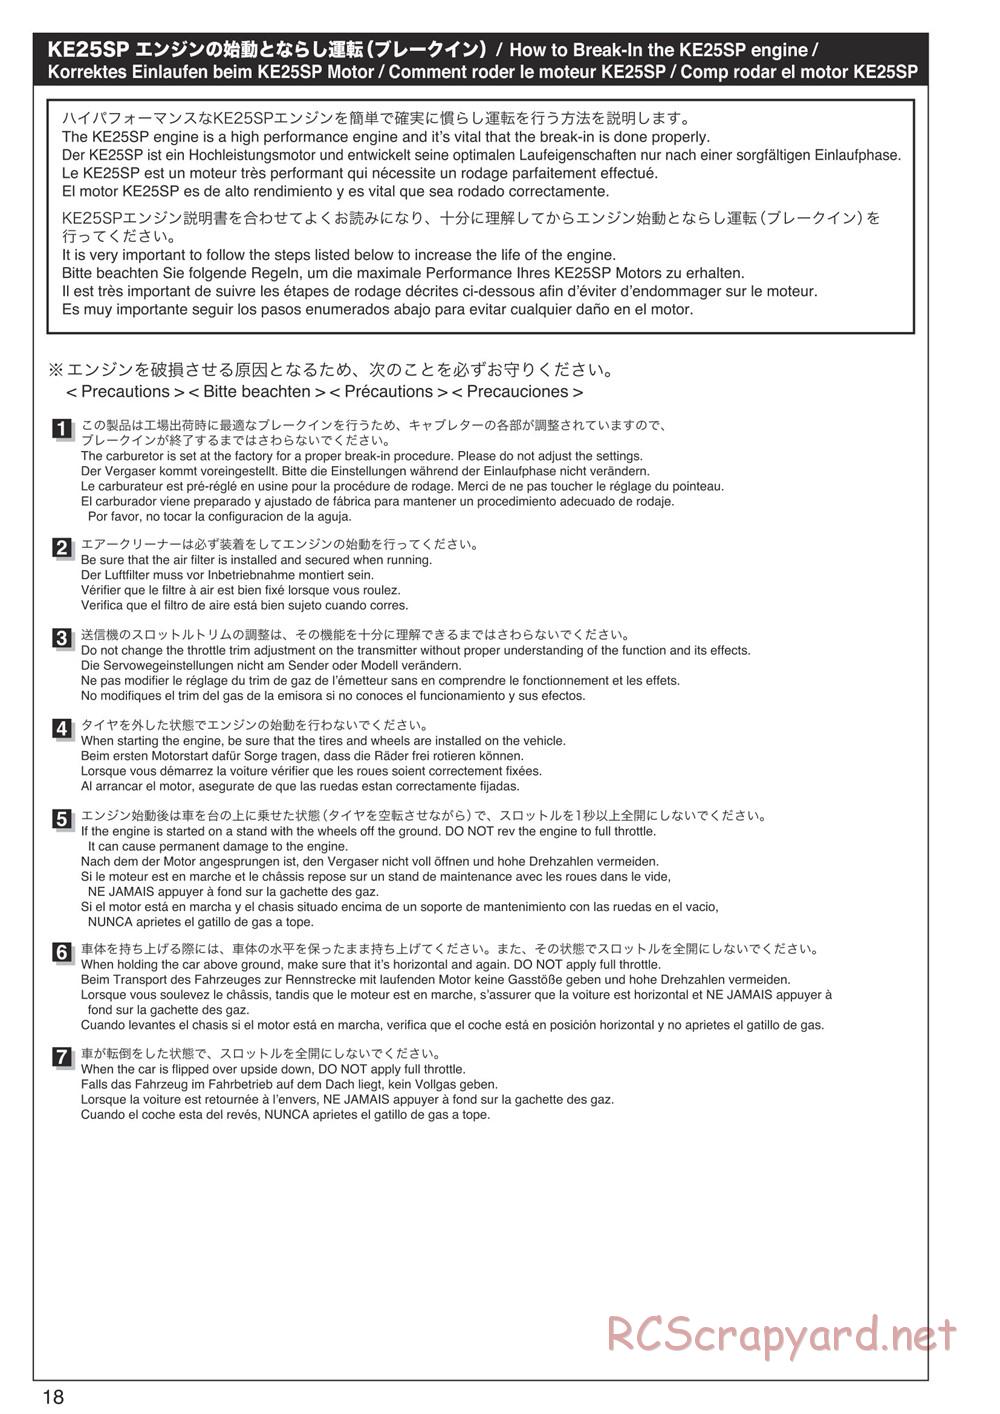 Kyosho - Inferno Neo ST 3.0 - Manual - Page 18